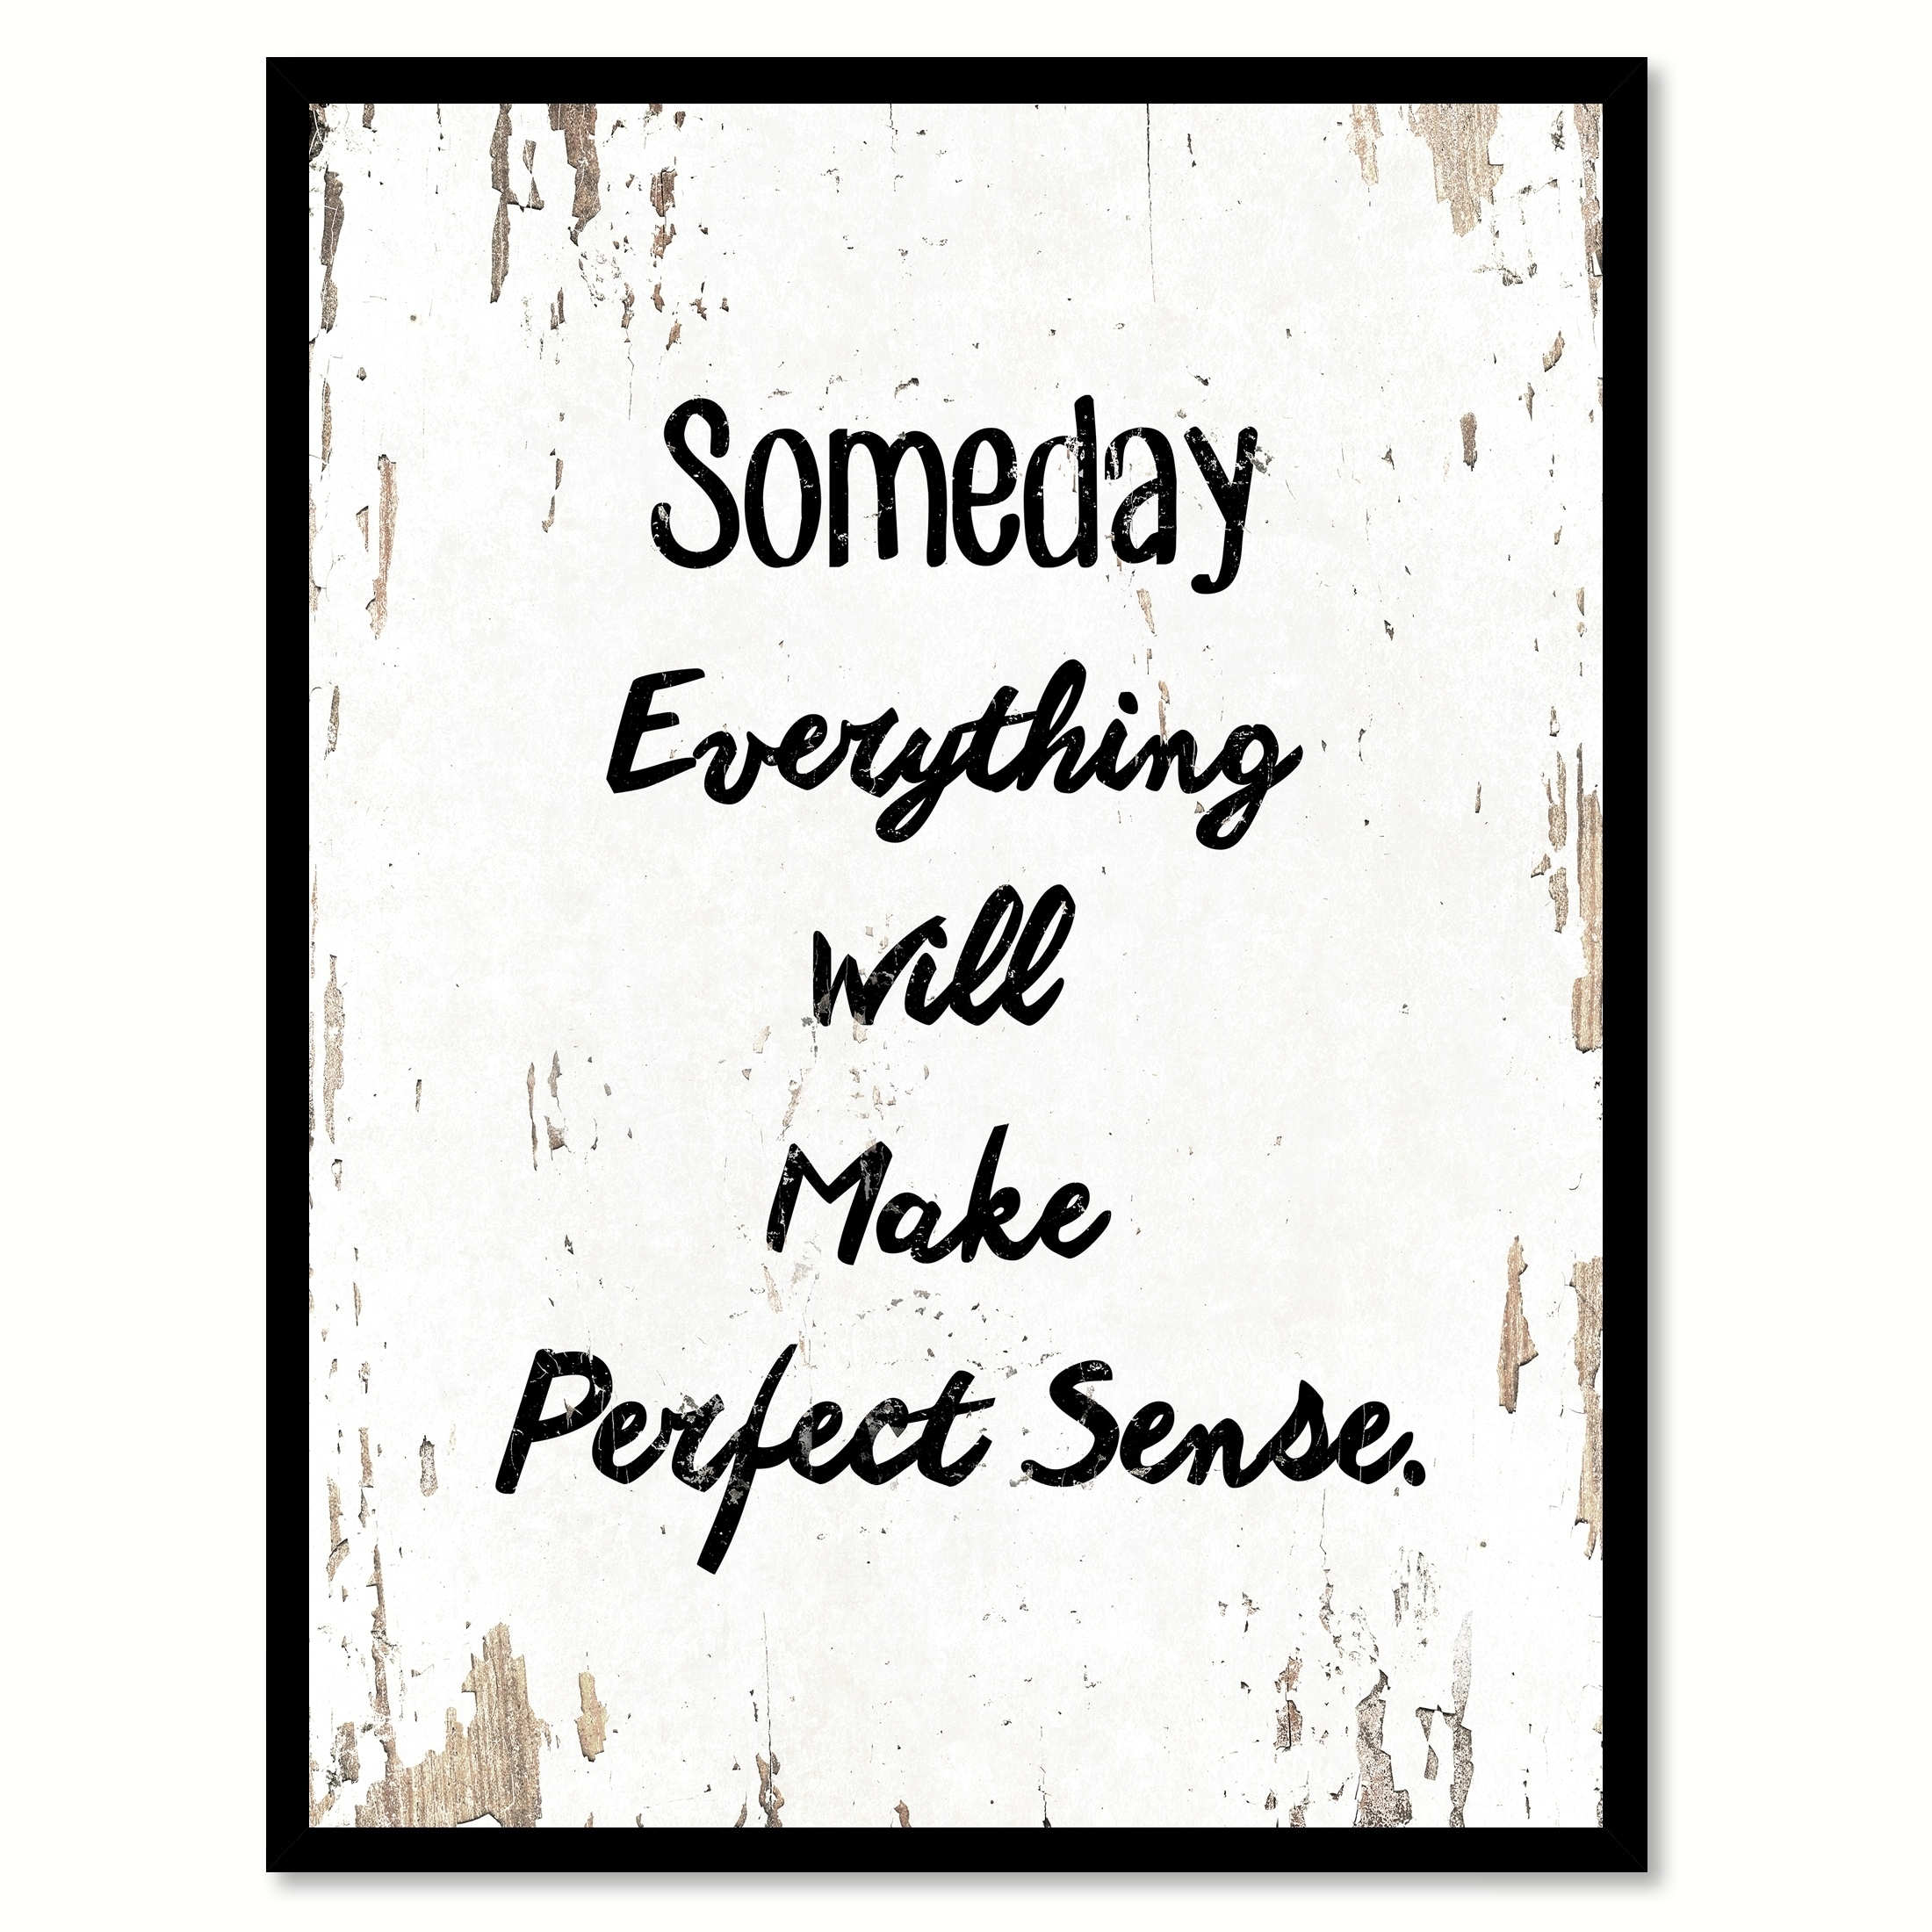 Someday Everything Will Make Perfect Sense Quote Saying Canvas Print Picture Frame Home Decor Wall Art Overstock 1745